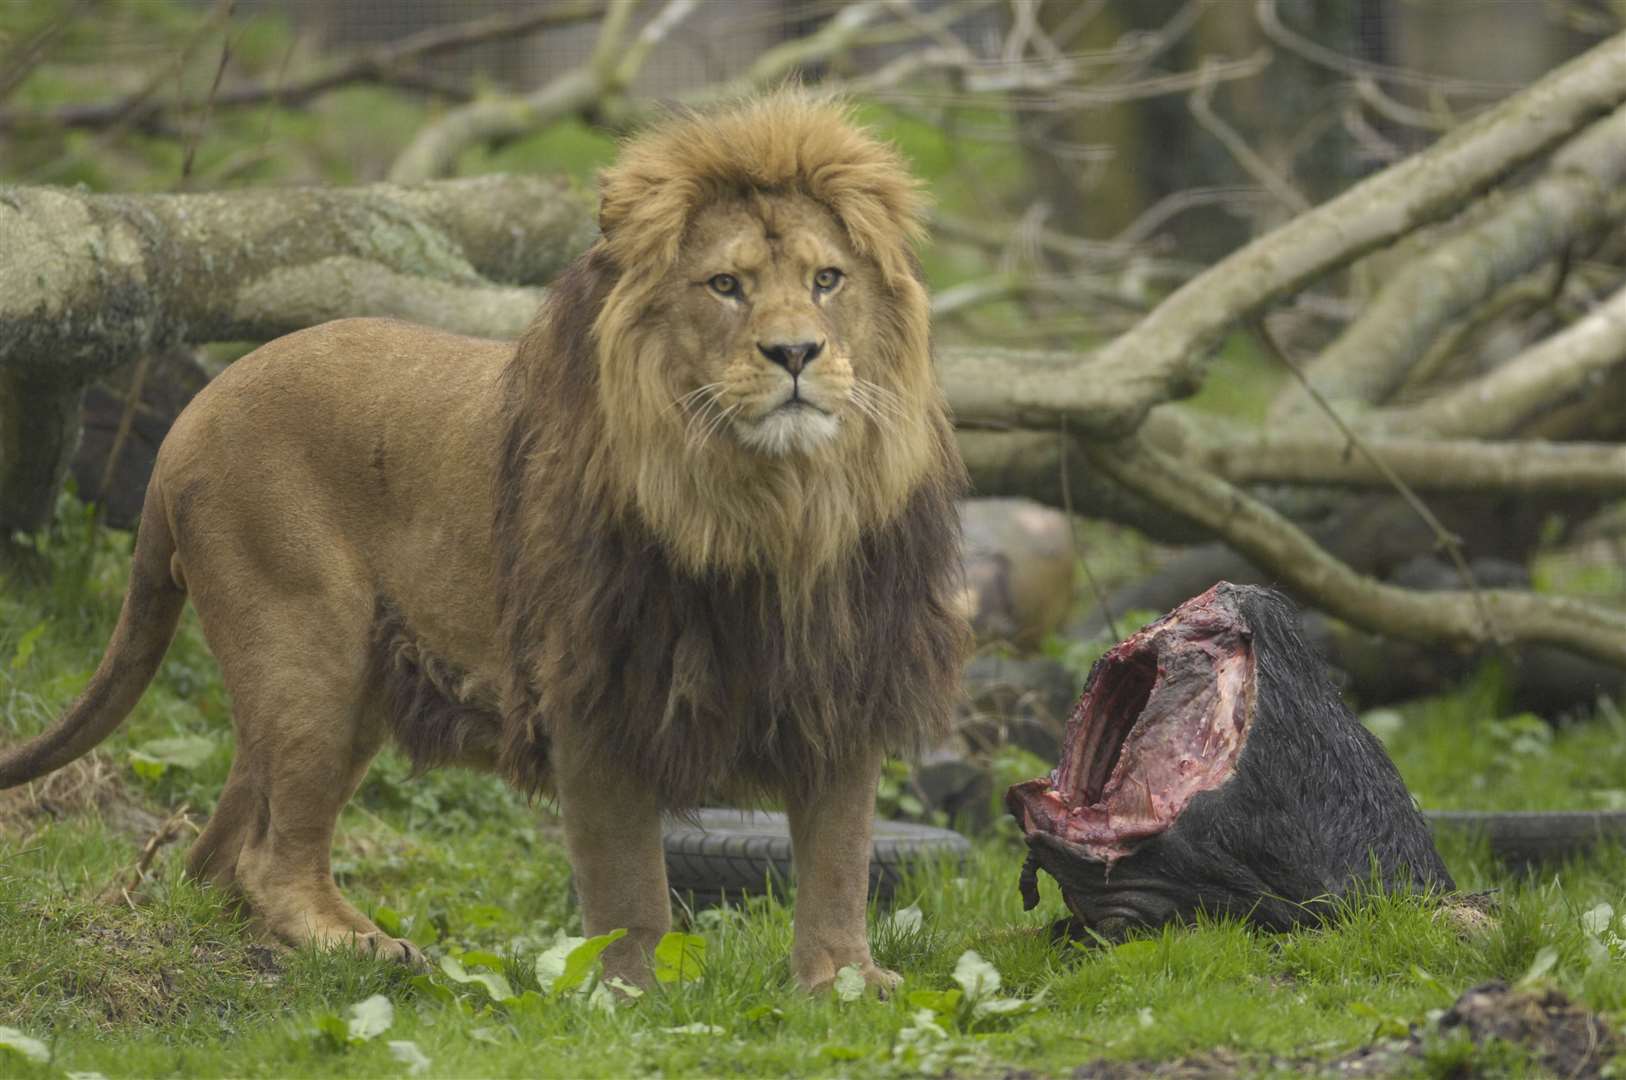 Barbary Lion may not get to see France